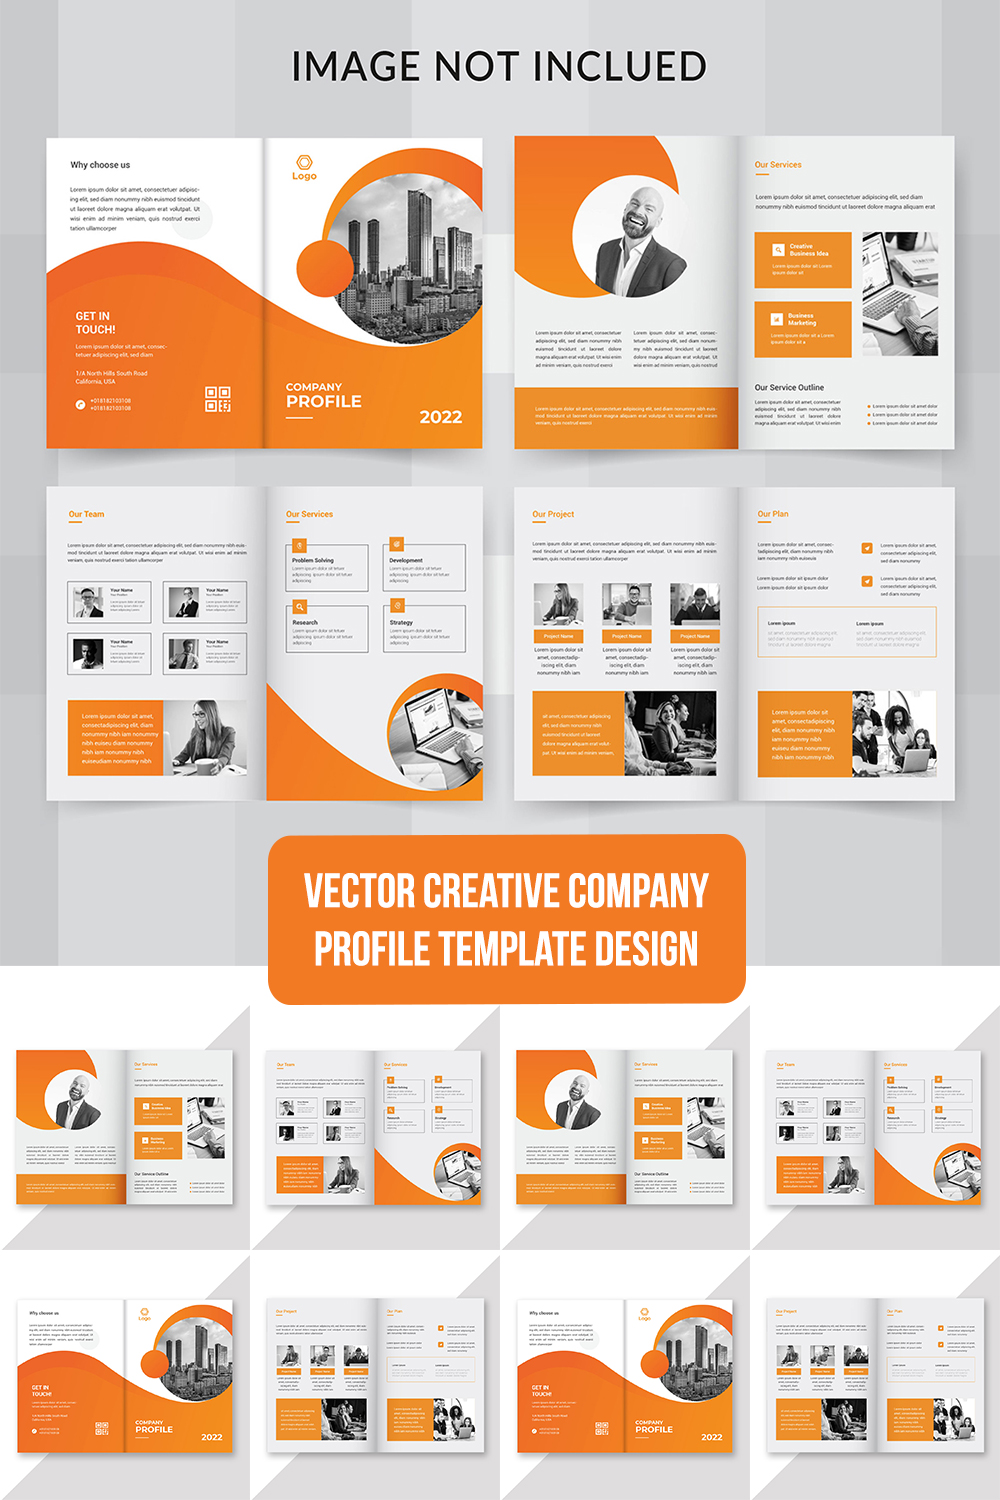 Professional company profile template design pinterest preview image.